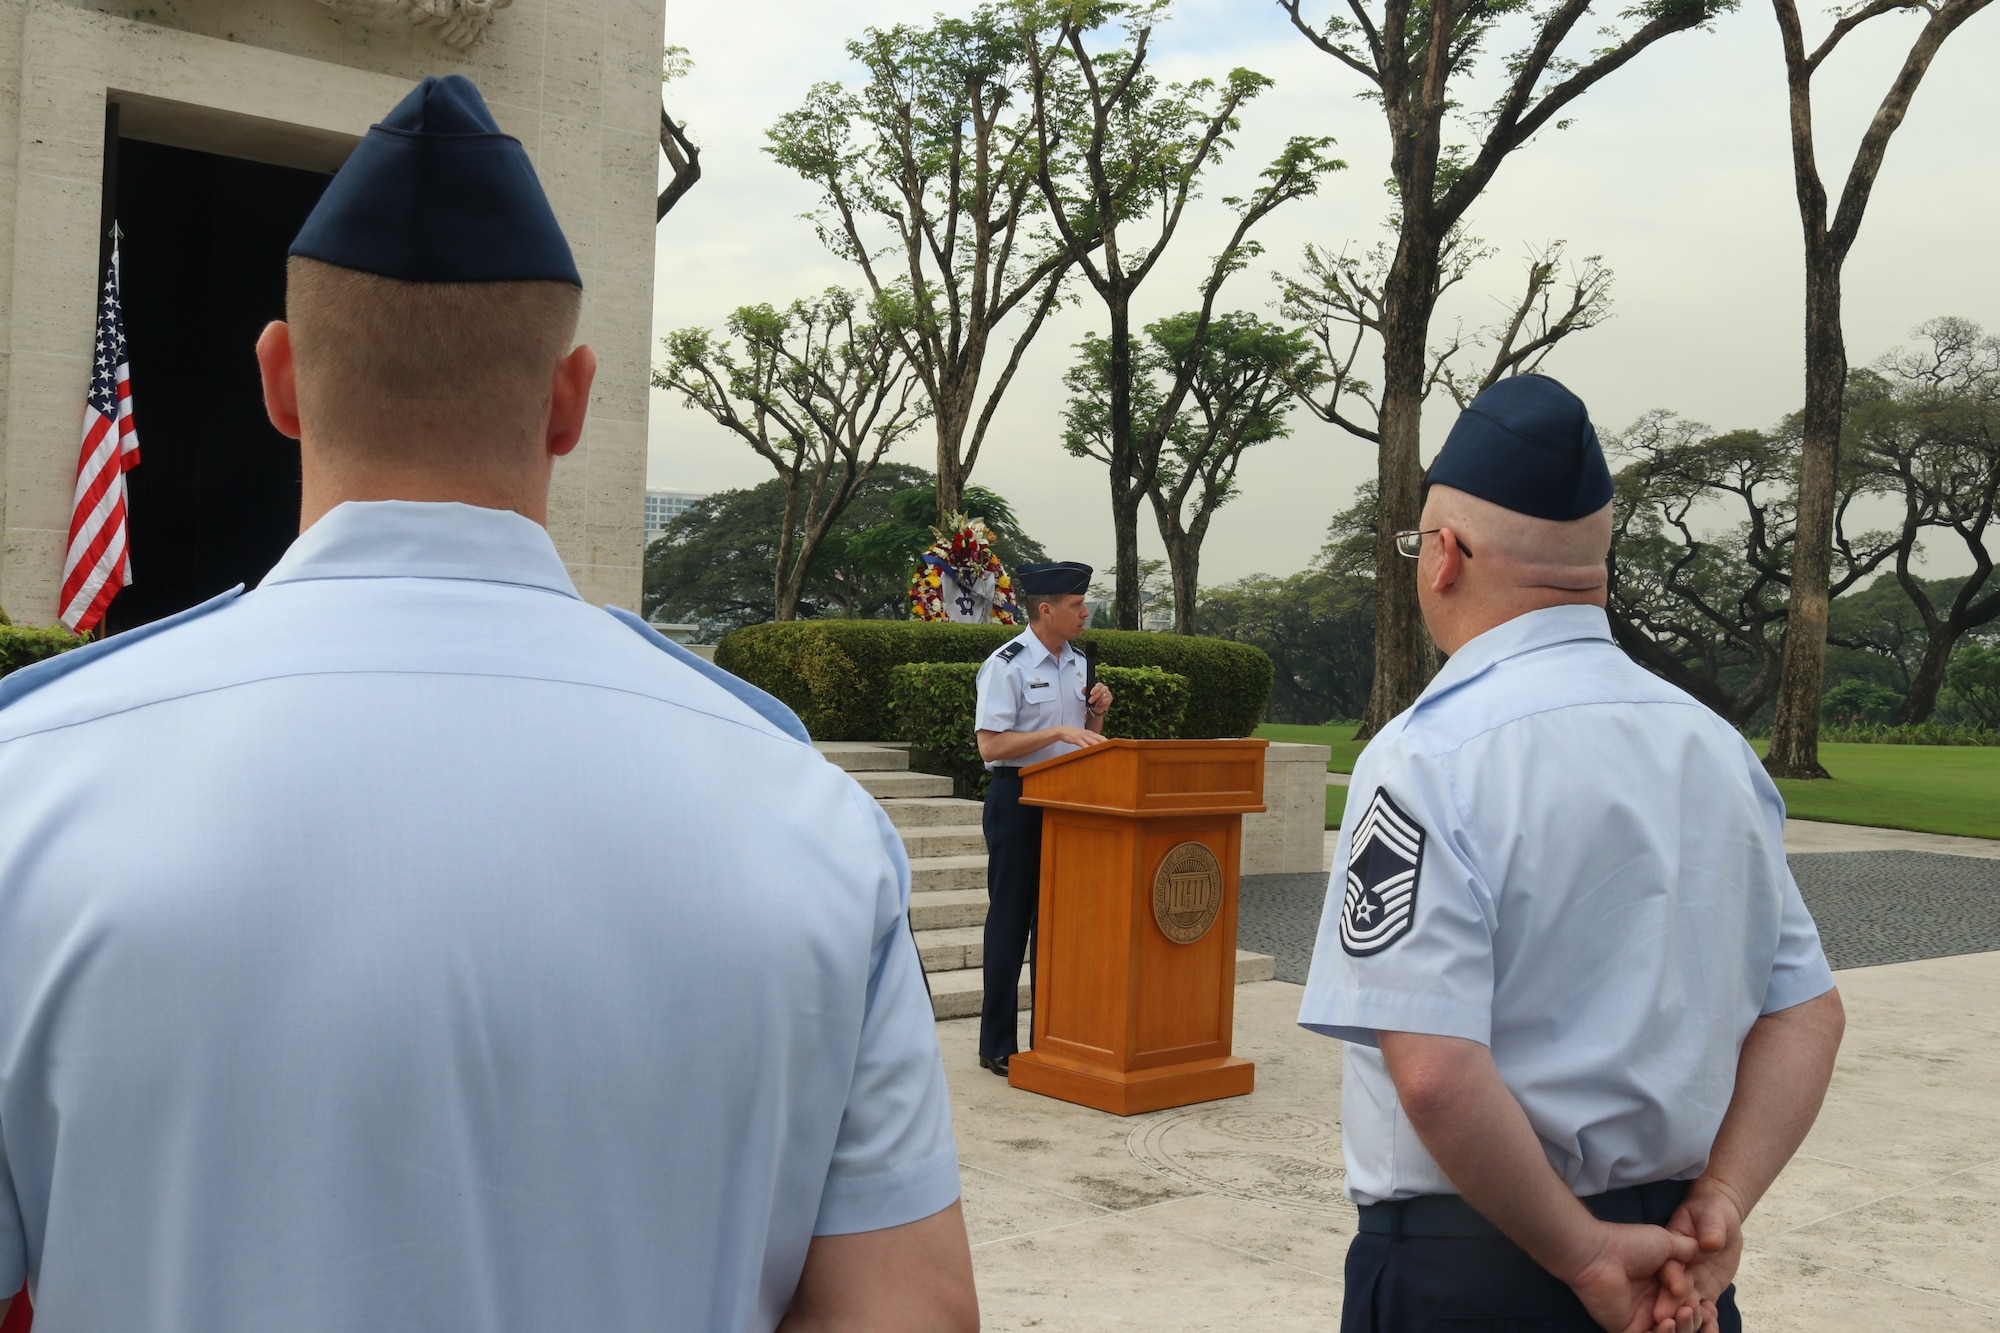 Col. Jeffrey Menasco, 317th Airlift Wing commander, gives a speech during the 75th anniversary of the retaking of Corregidor Island ceremony at the Manila American Cemetery in Manila, Philippines, Feb. 17, 2020.